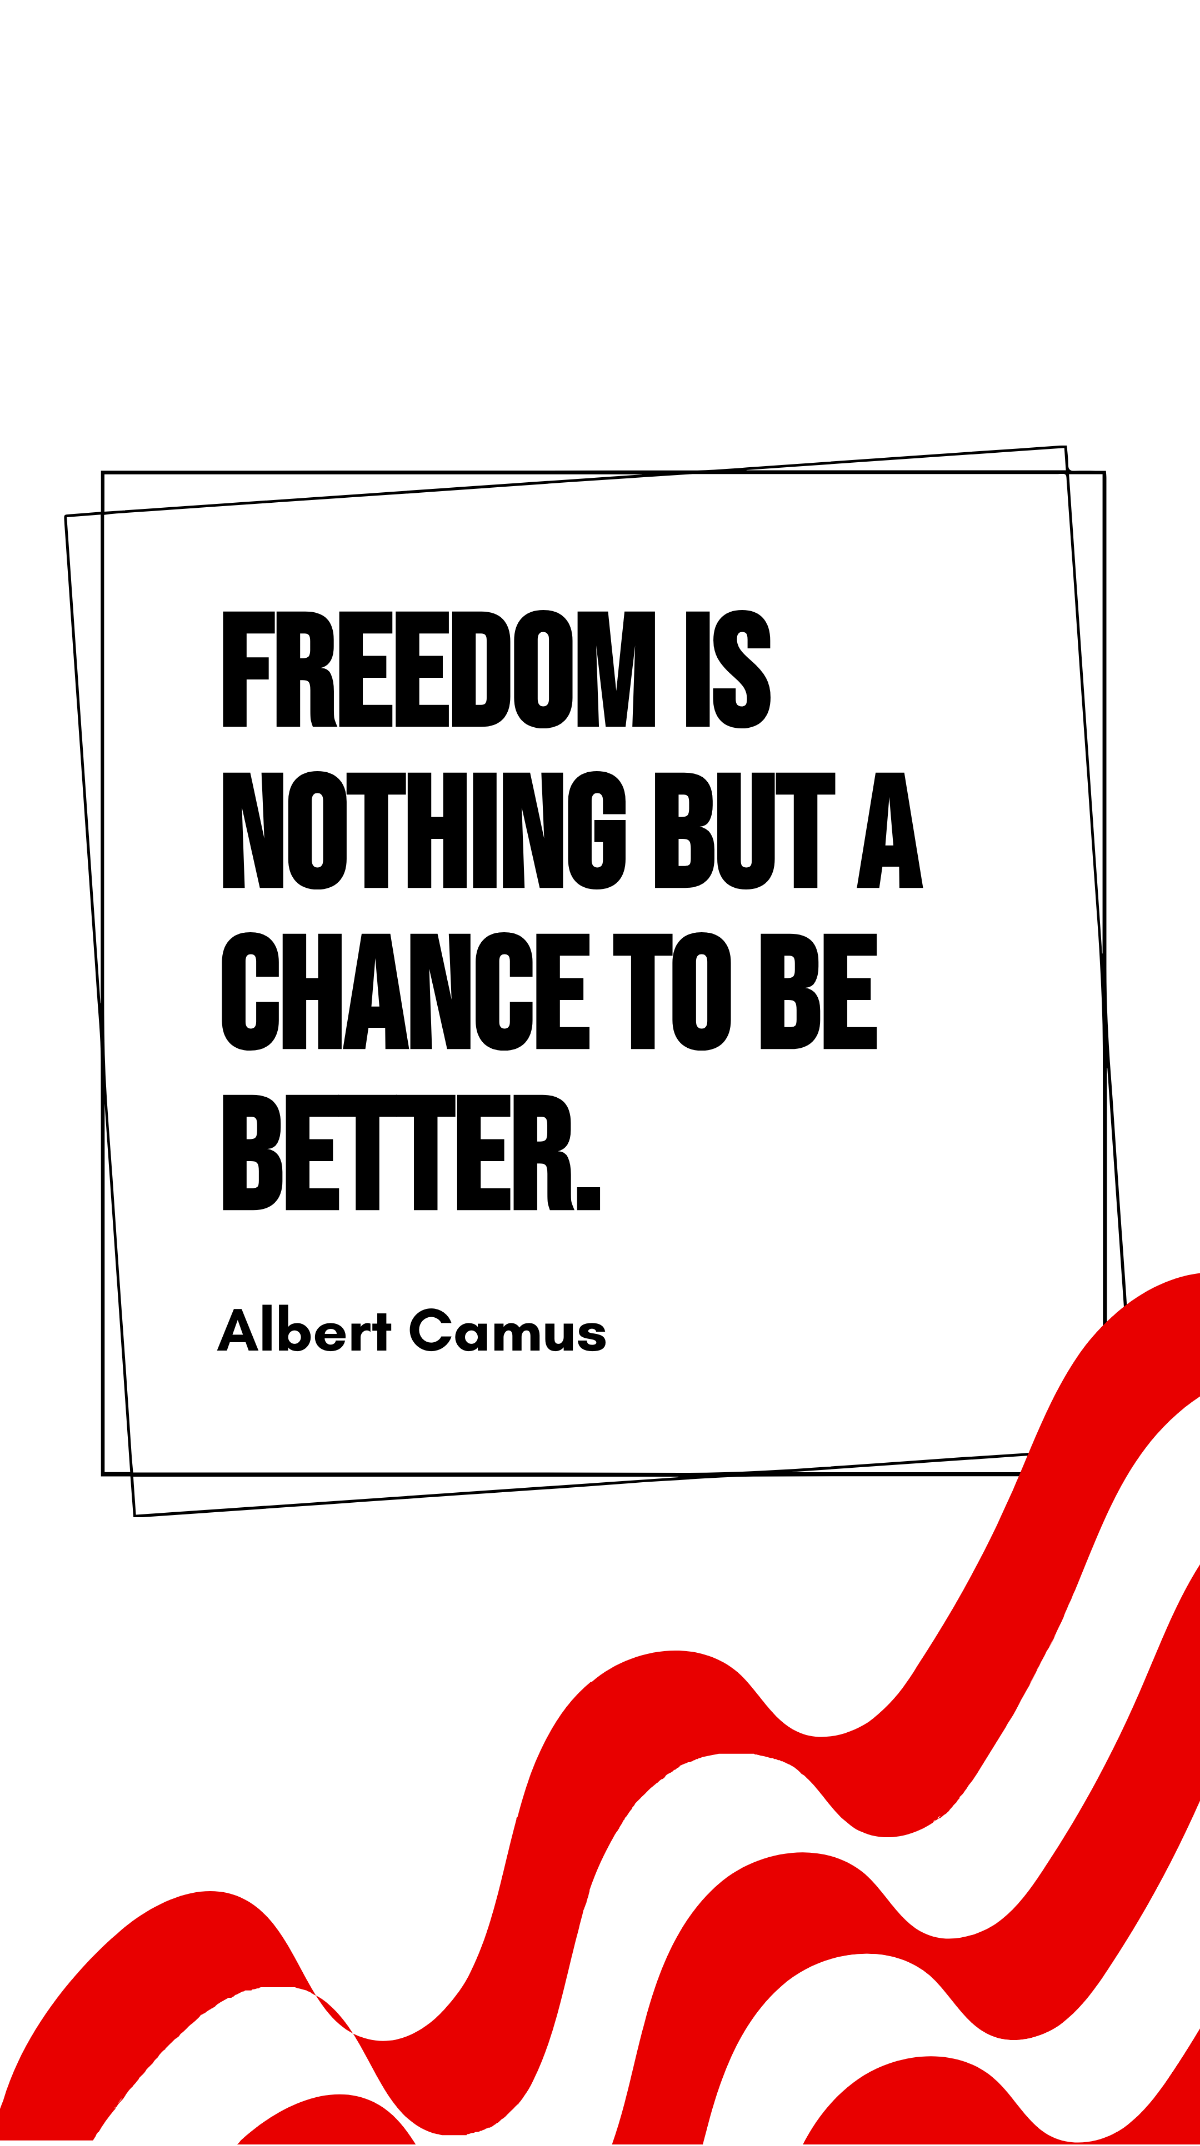 Albert Camus - Freedom is nothing but a chance to be better.